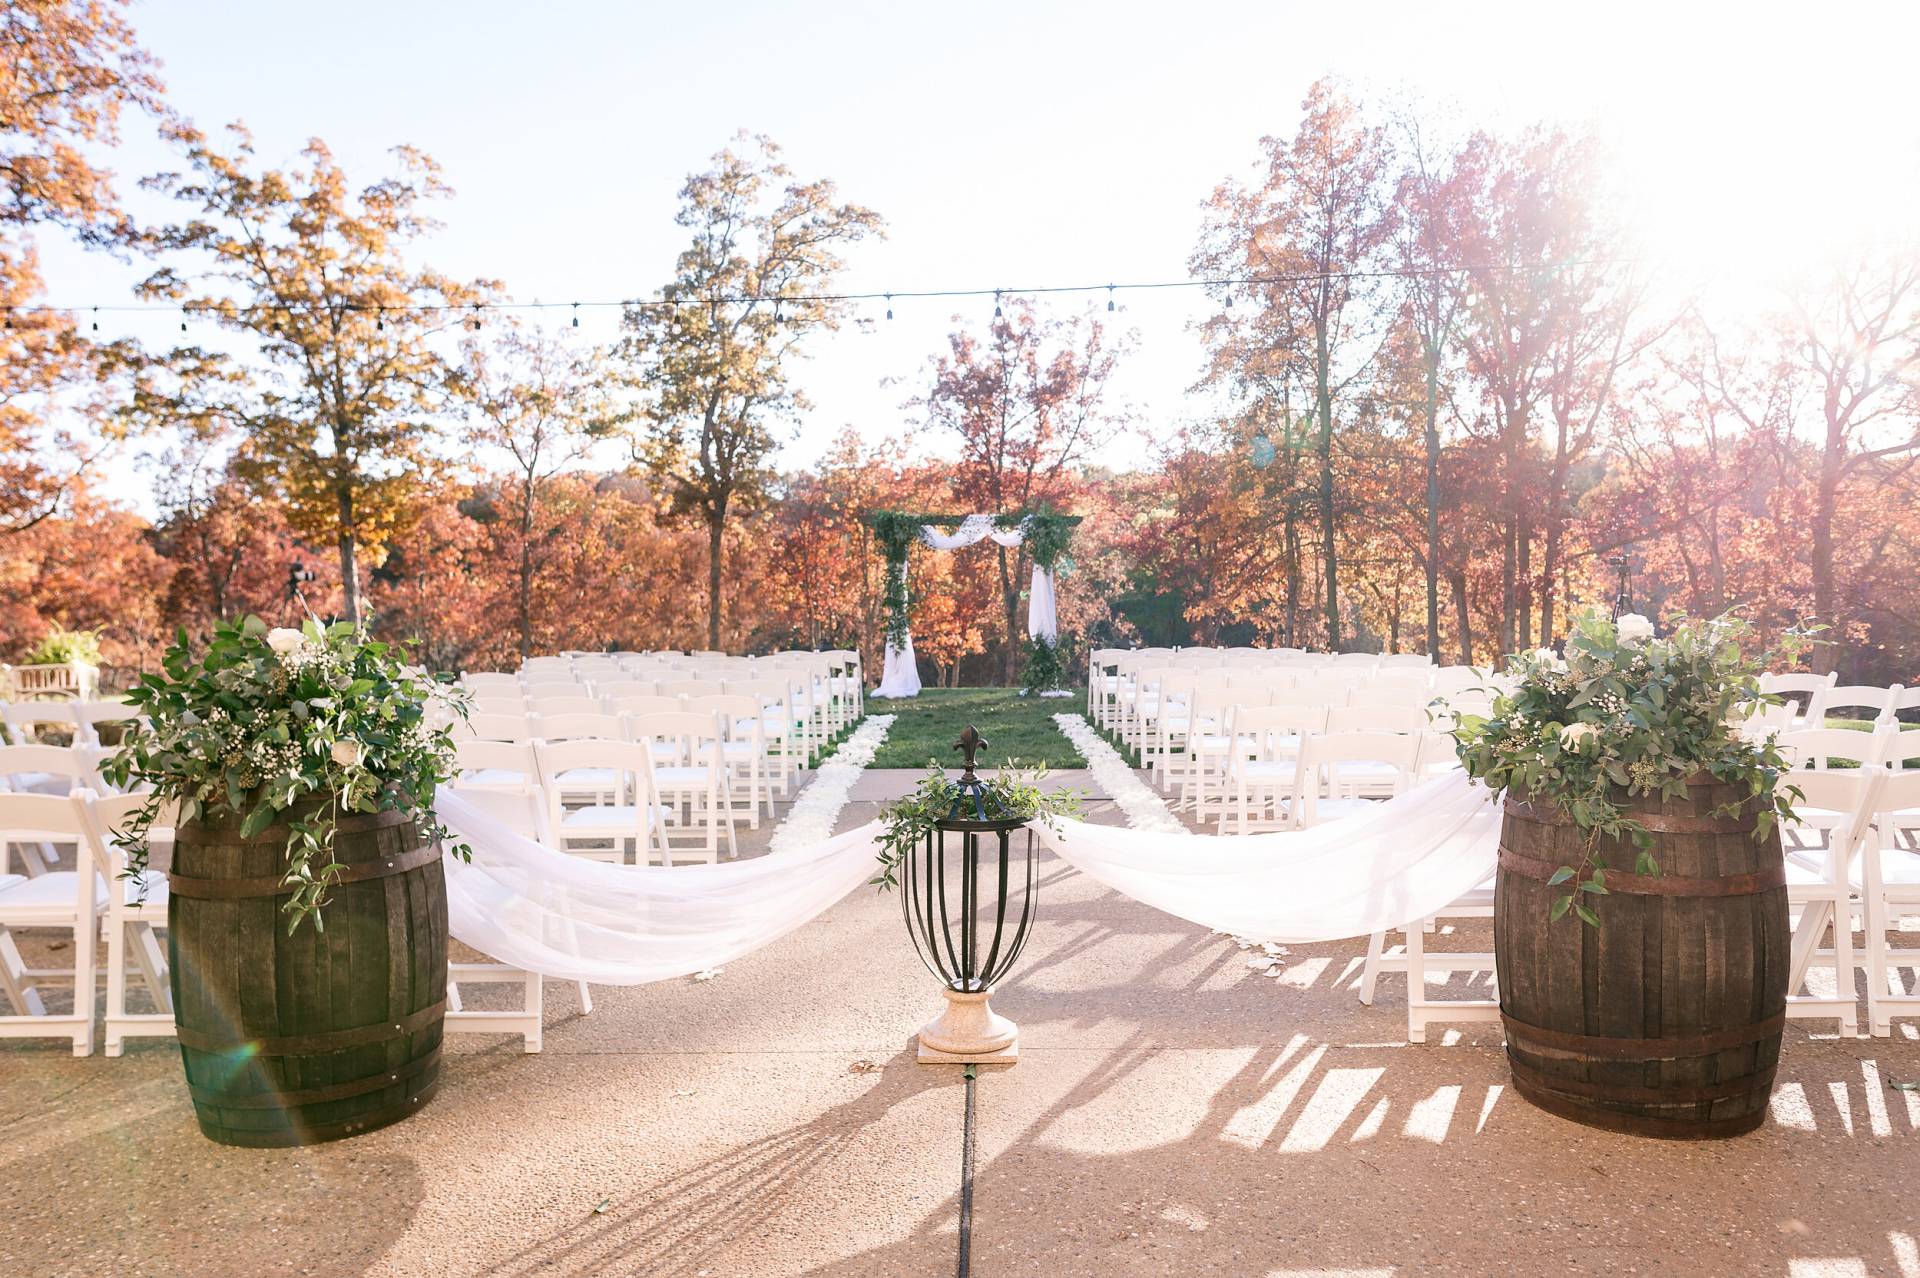 one of the many beautiful outdoor wedding venues in st louis